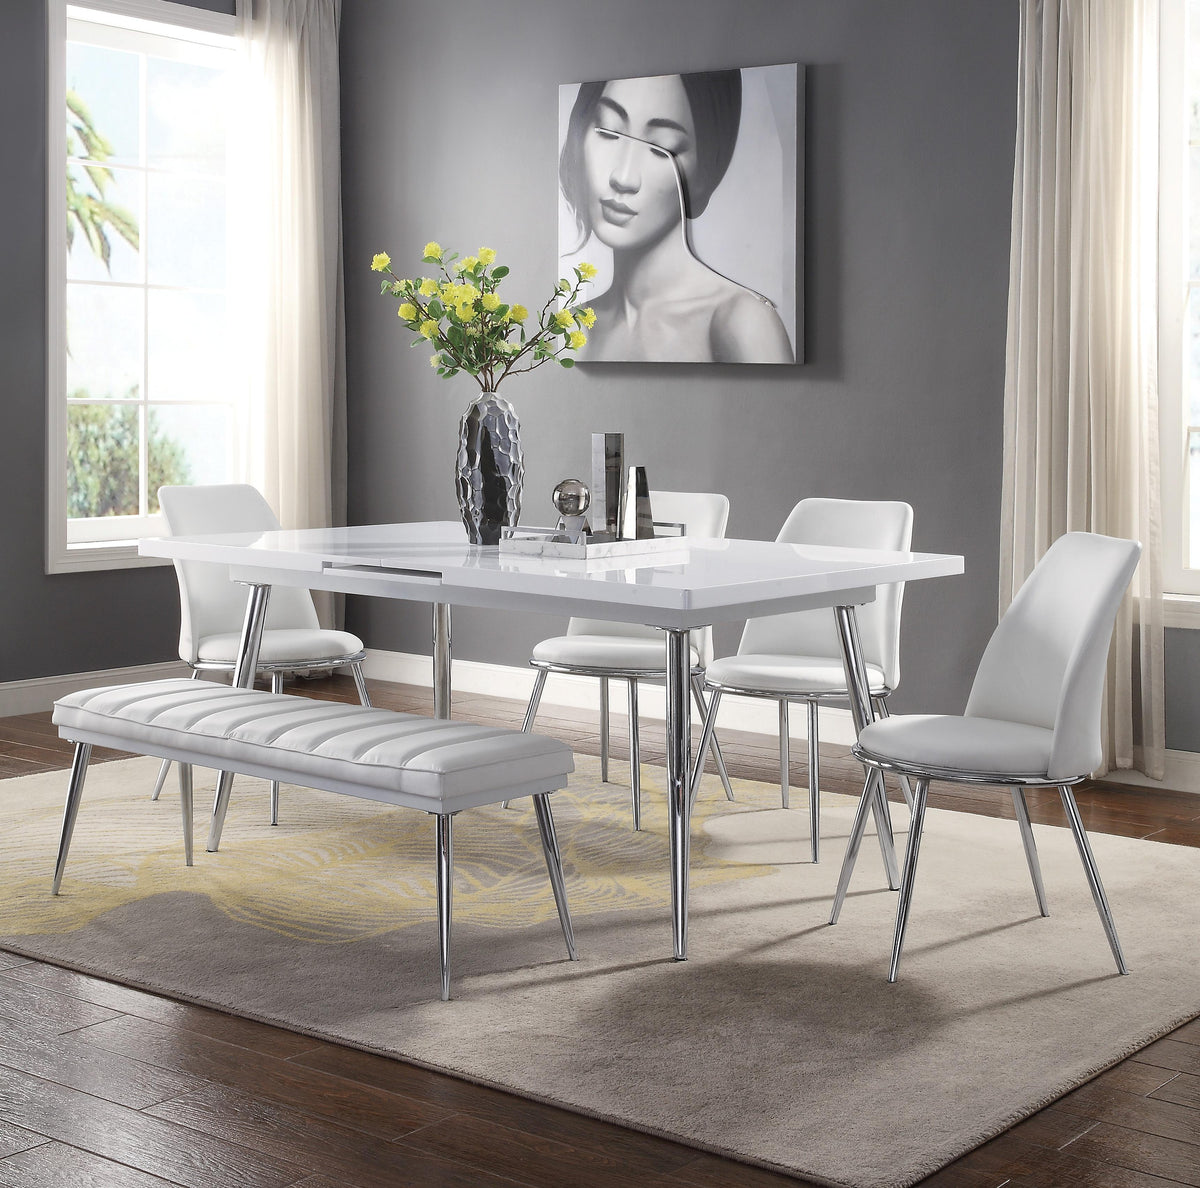 Weizor White High Gloss & Chrome Dining Table  Las Vegas Furniture Stores